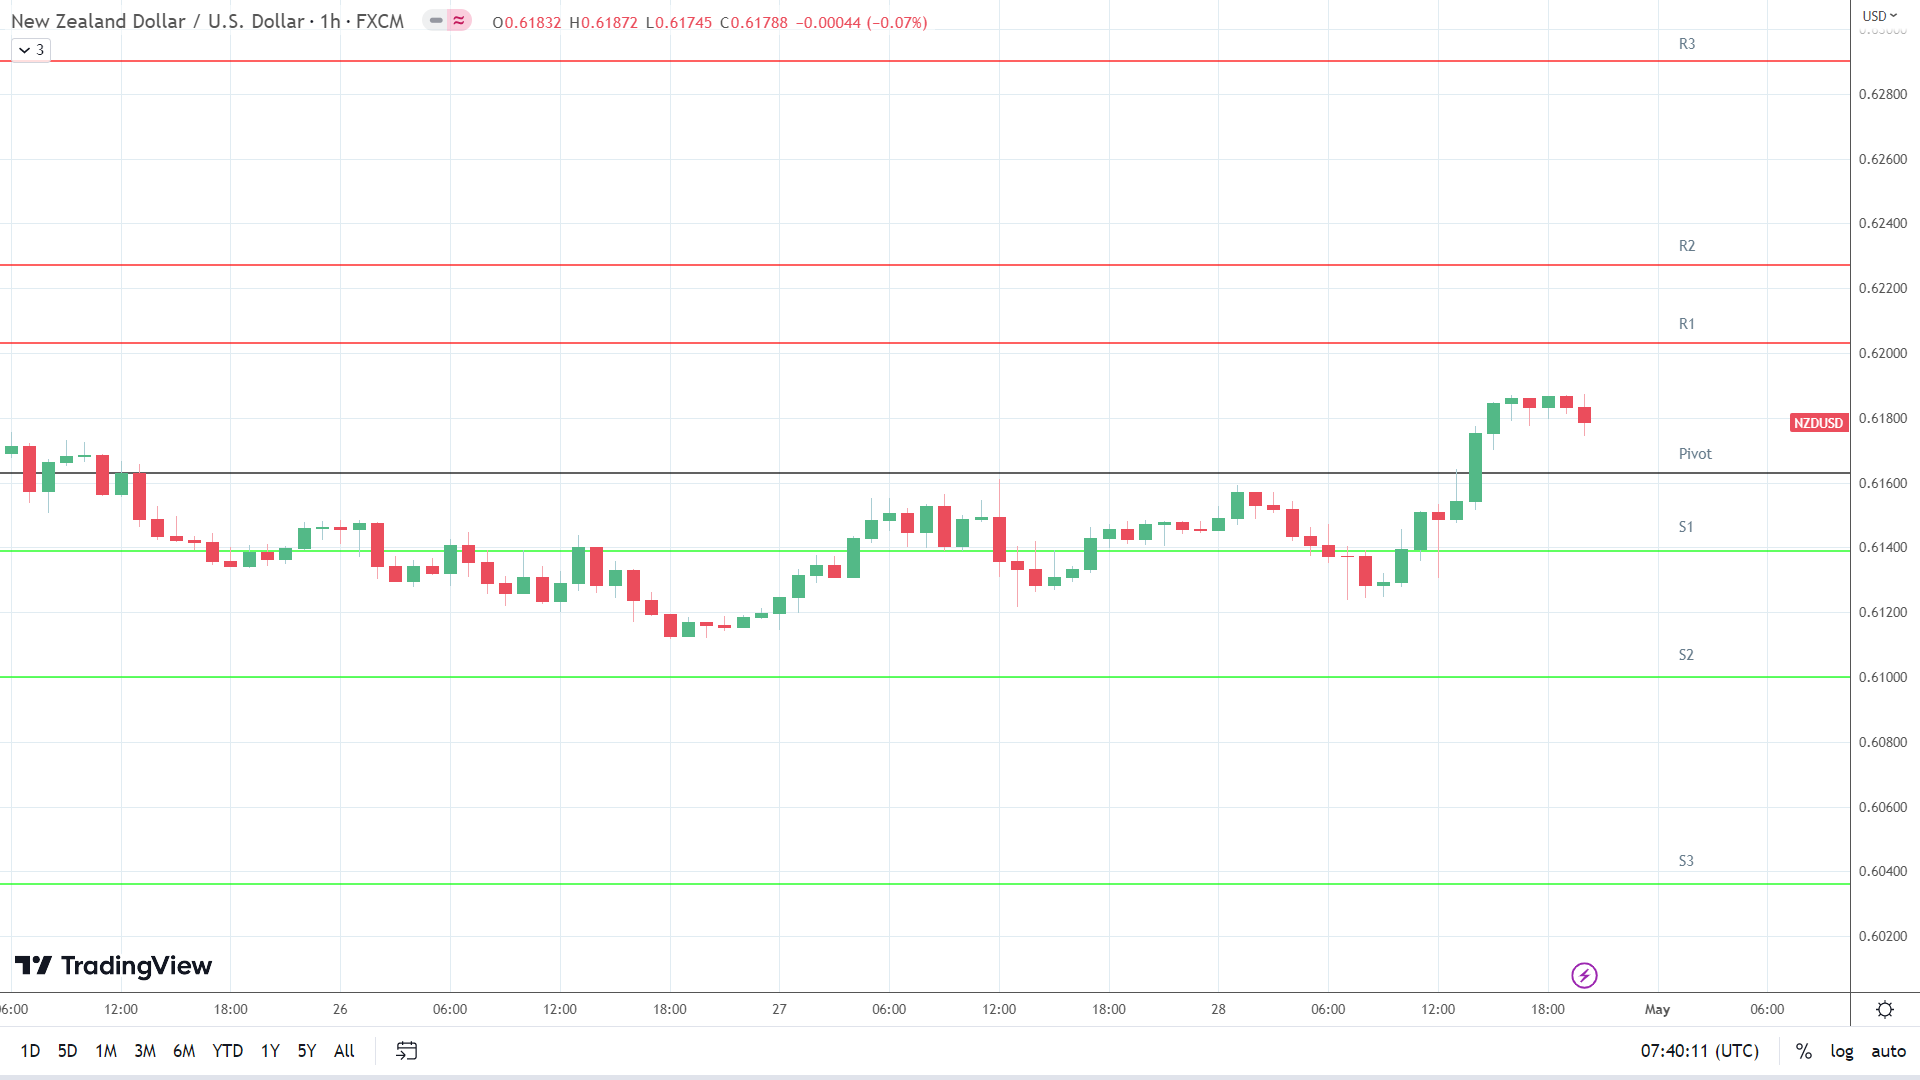 NZD/USD resistance levels in play above the pivot.